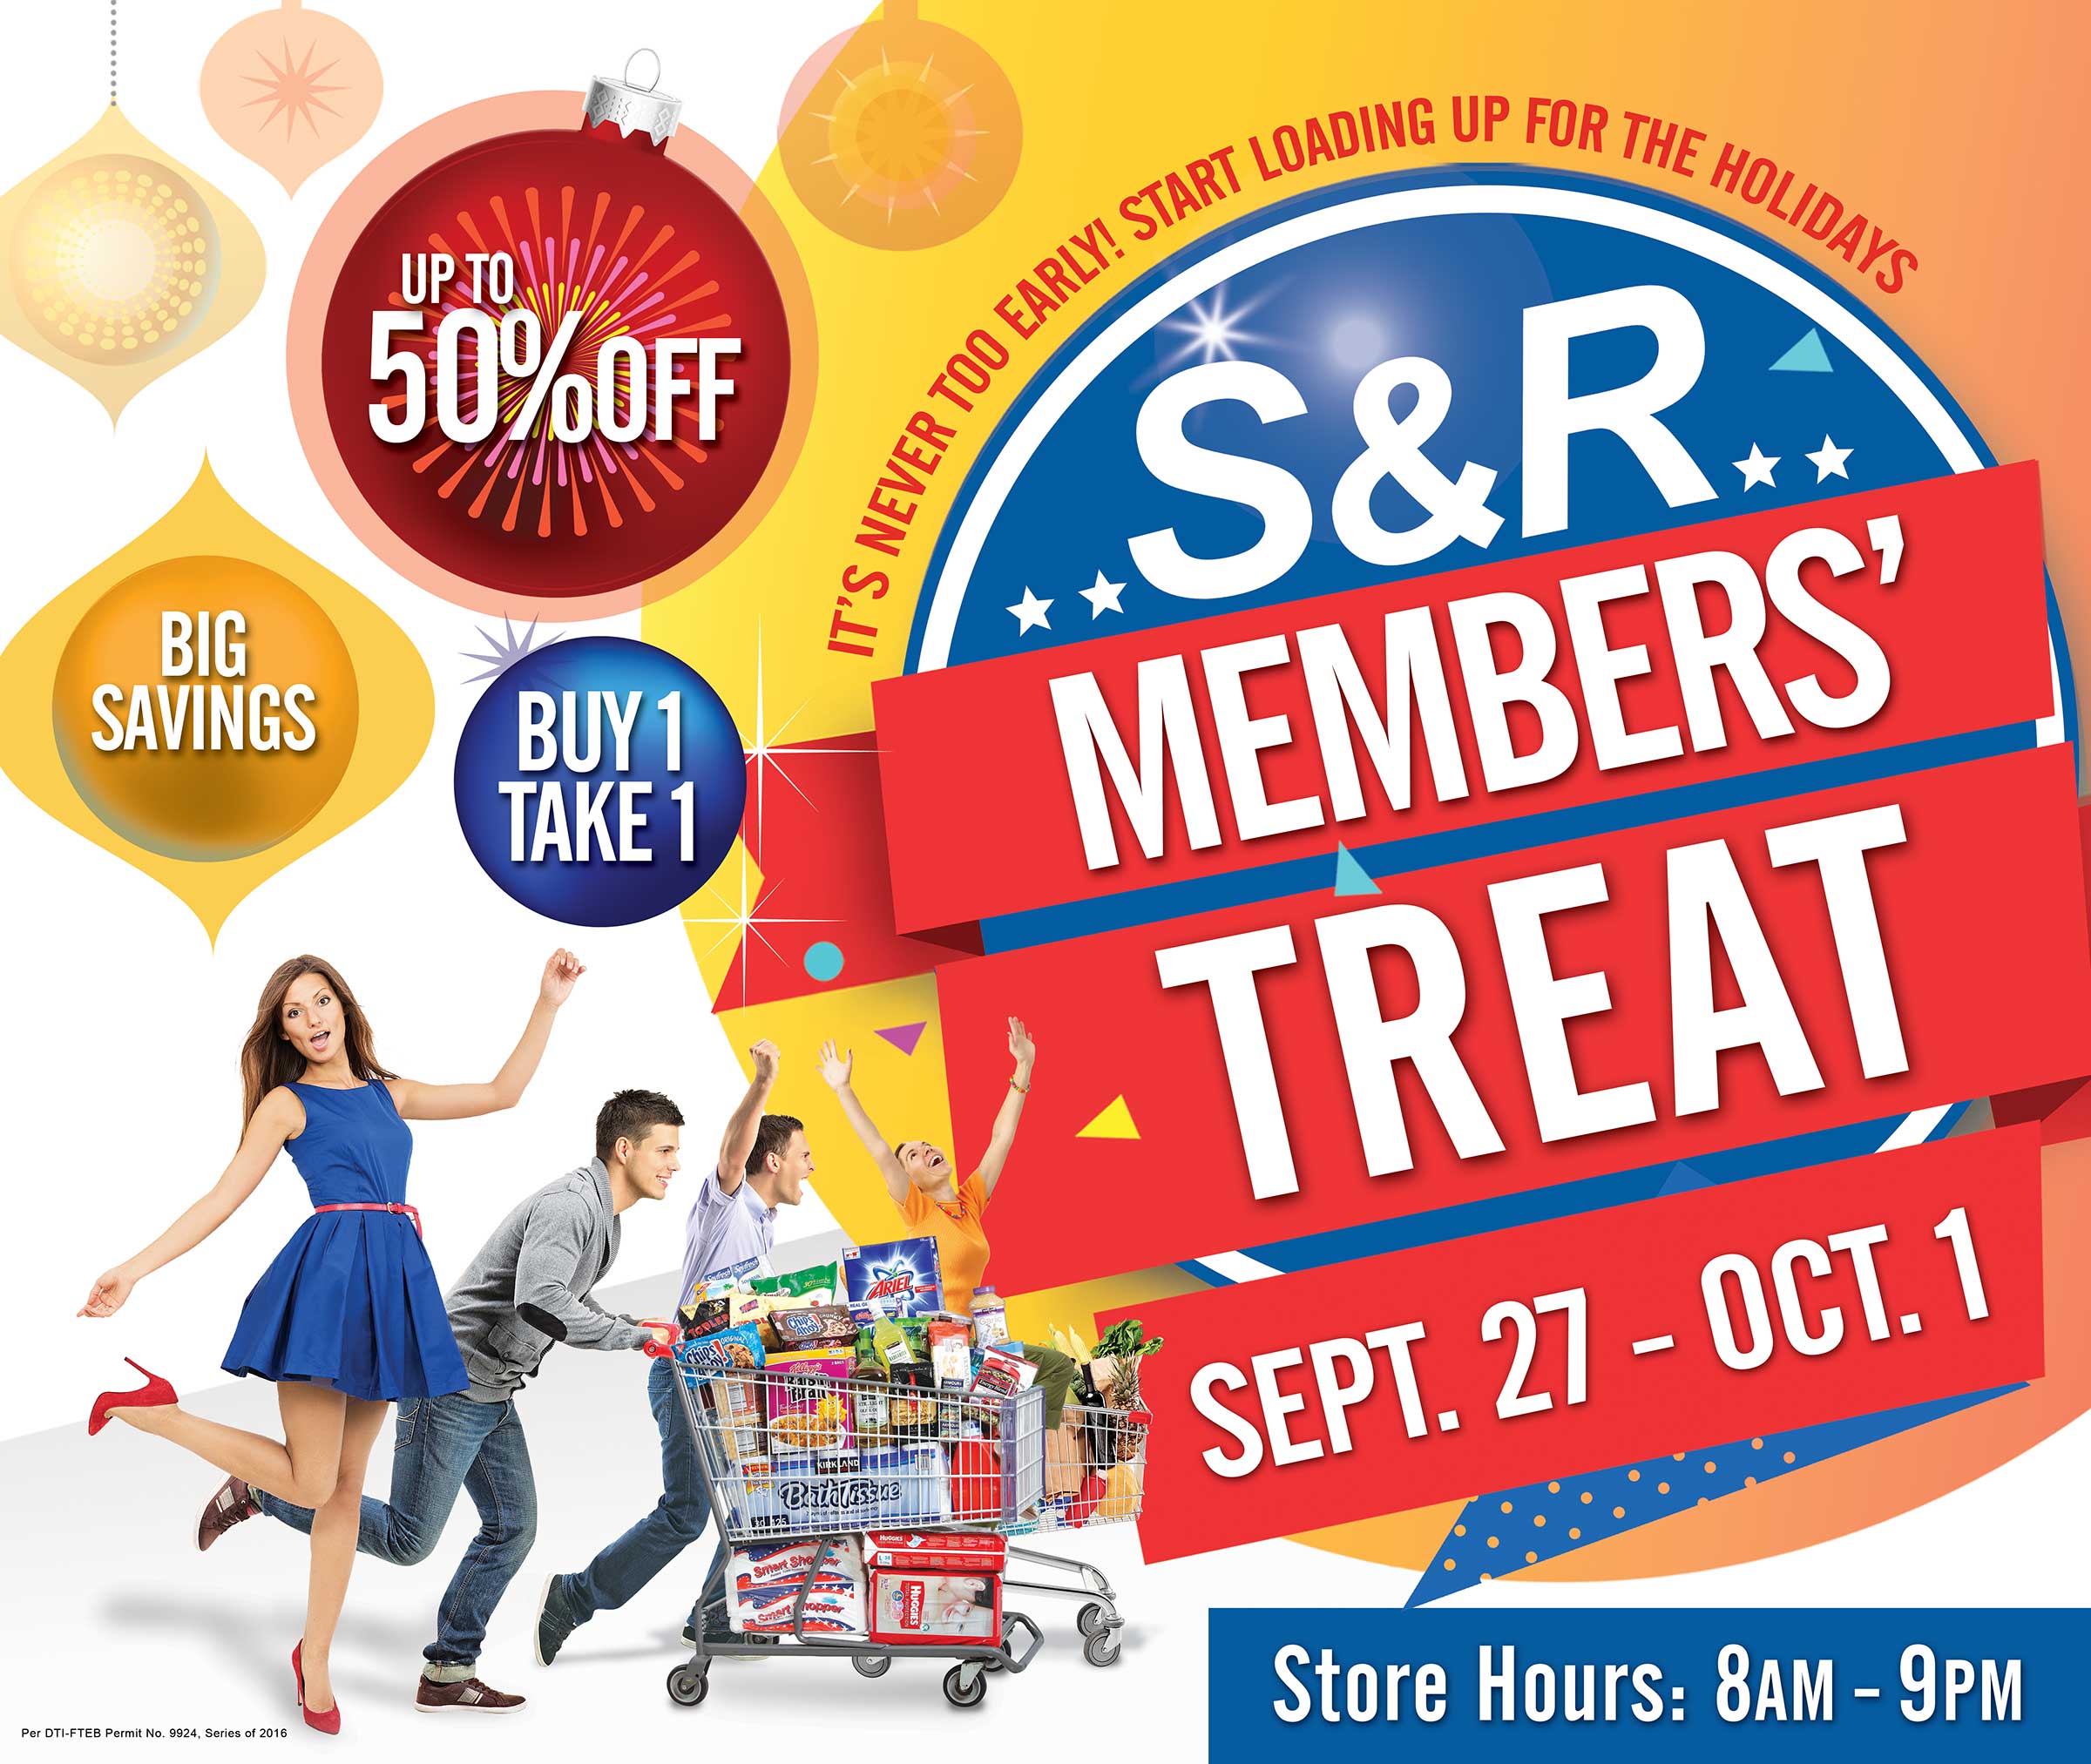 S&R CDO Members’ Treat Sale is set this September 27 to October 1